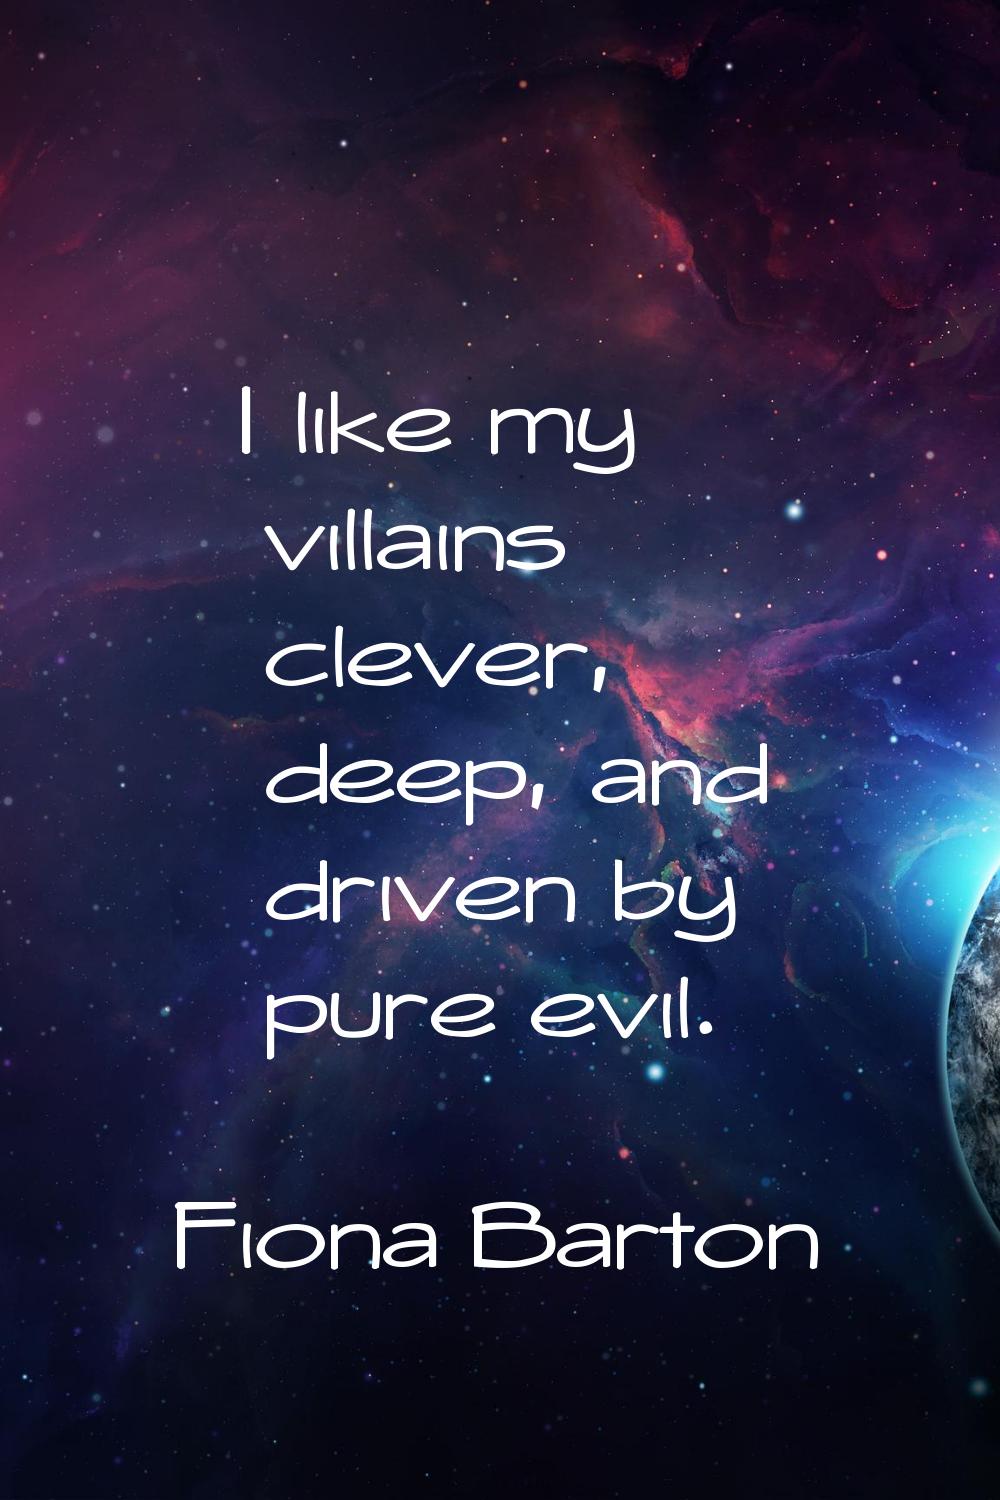 I like my villains clever, deep, and driven by pure evil.